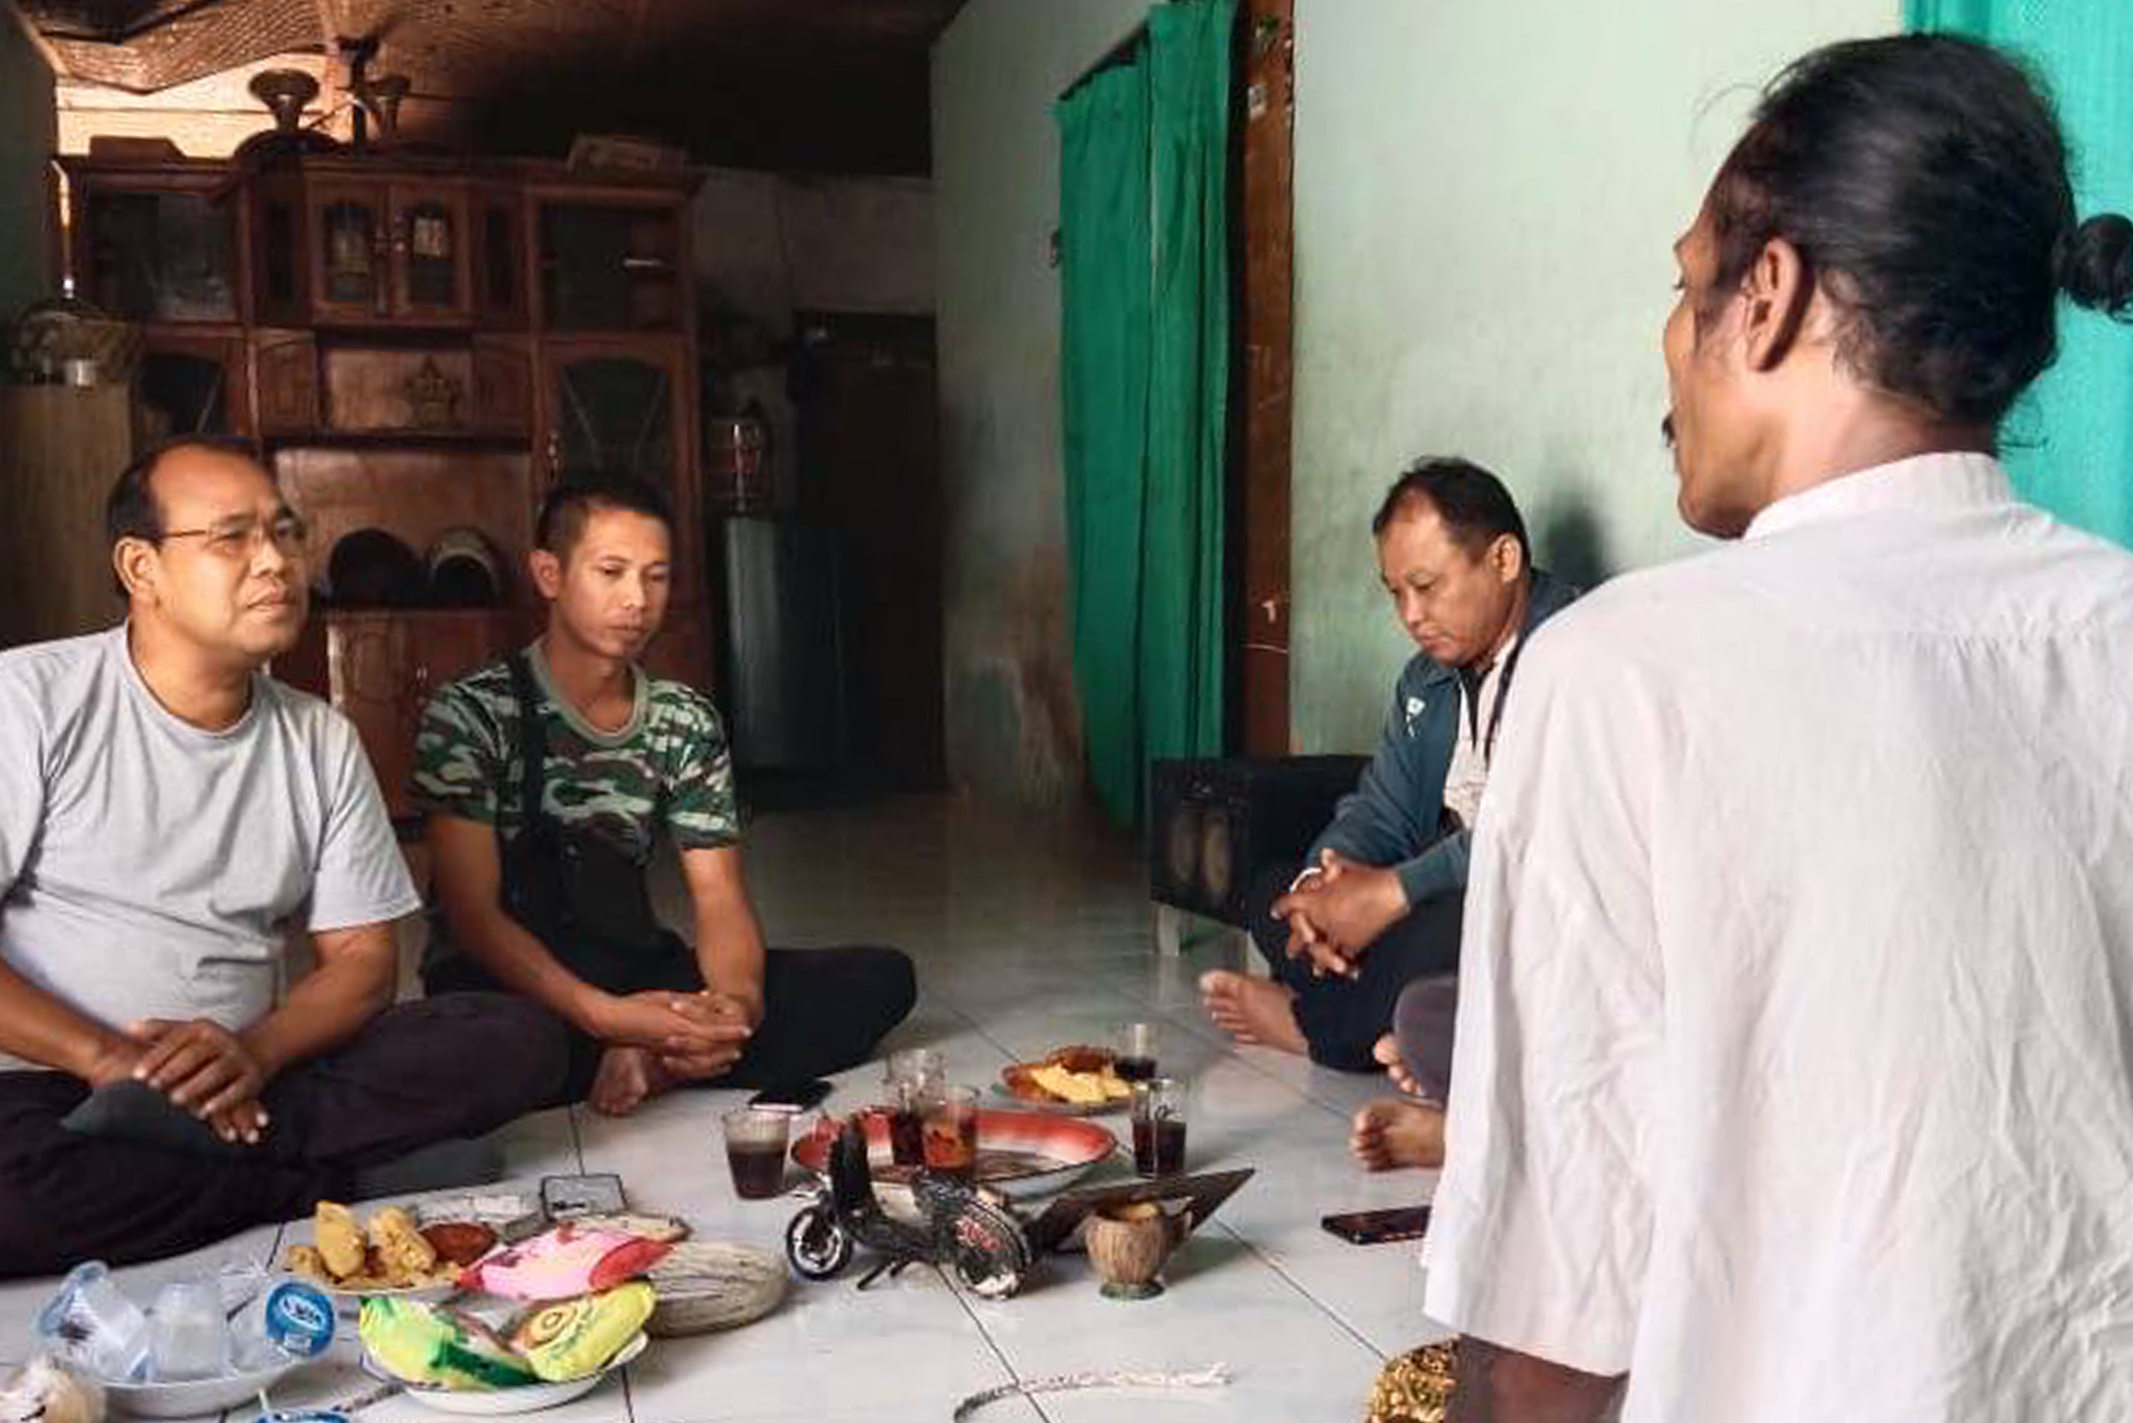 Indonesian men sitting cross-legged on the floor sharing a meal together